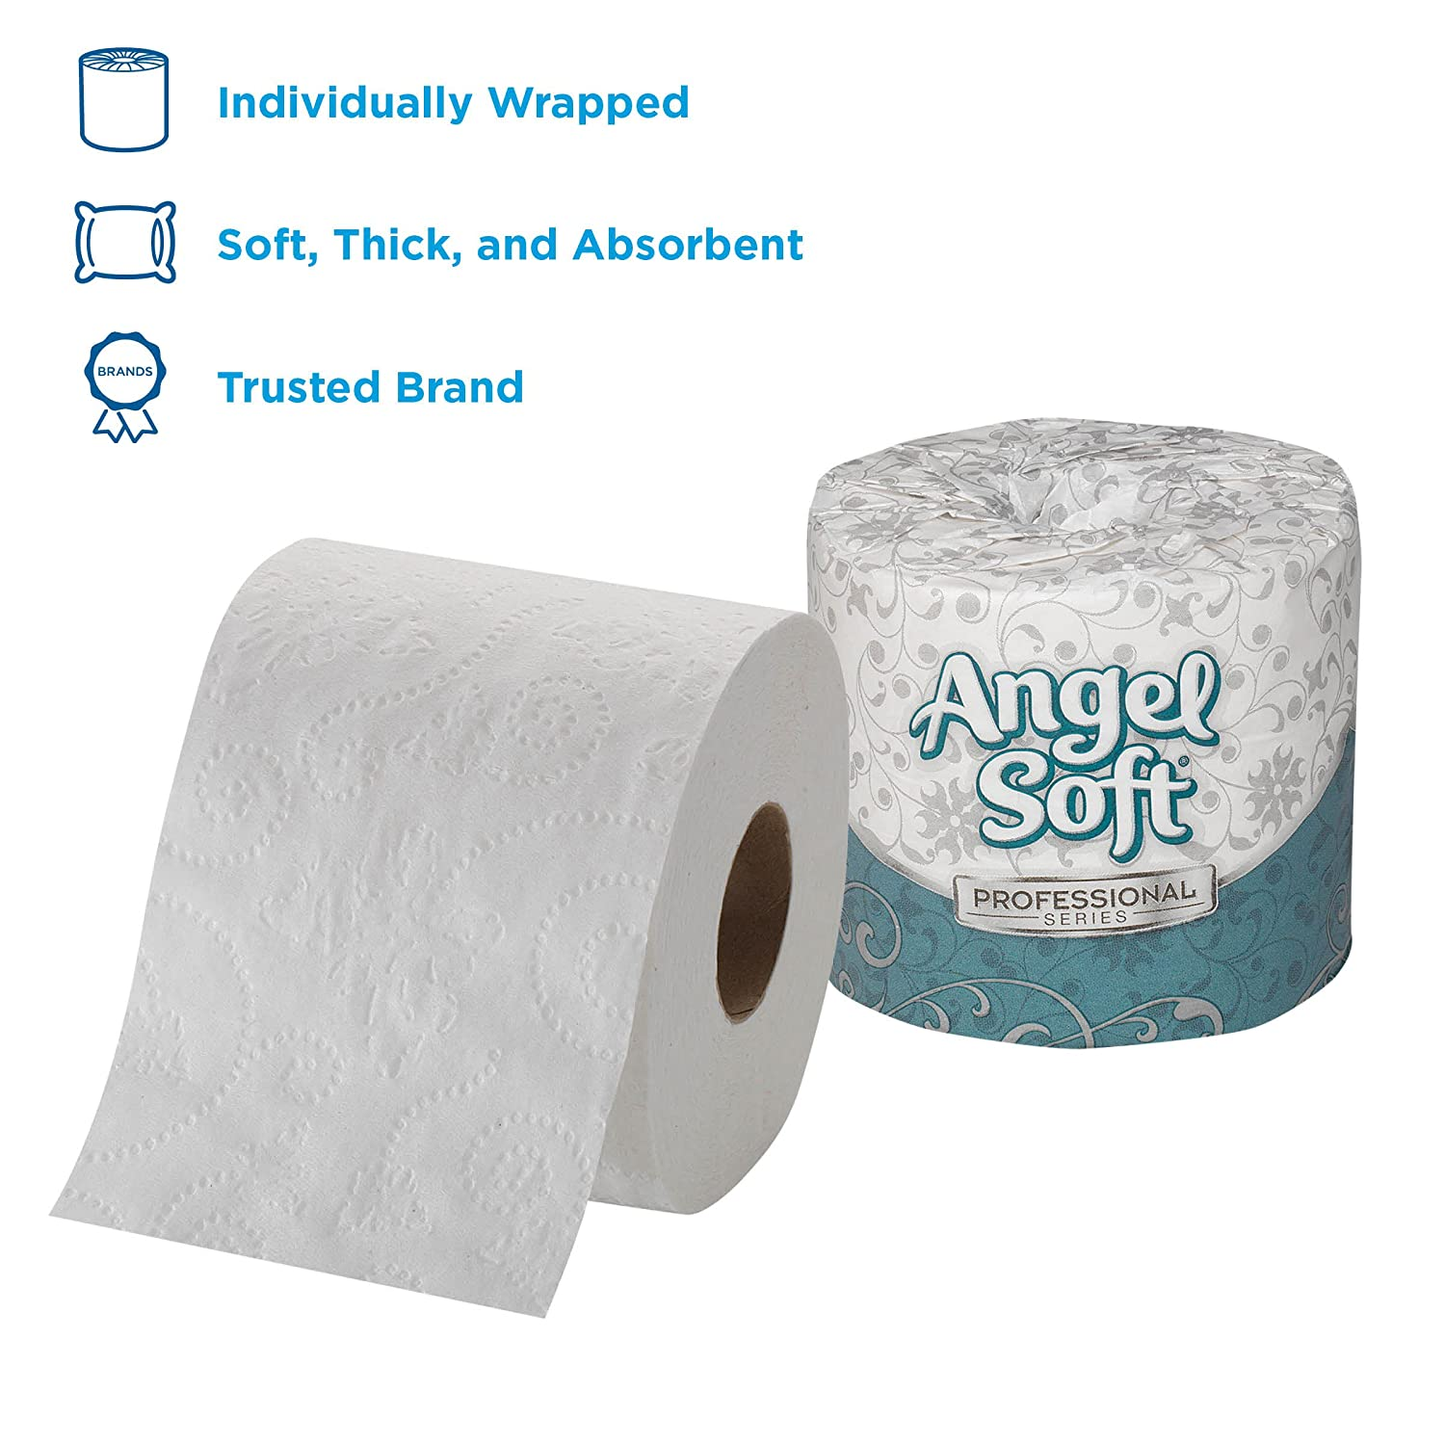 Georgia-Pacific Angel Soft Ps 16880 White 2-Ply Premium Embossed Bathroom Tissue, 4.05" Length X 4.0" Width (Case of 80 Rolls, 450 Sheets per Roll)